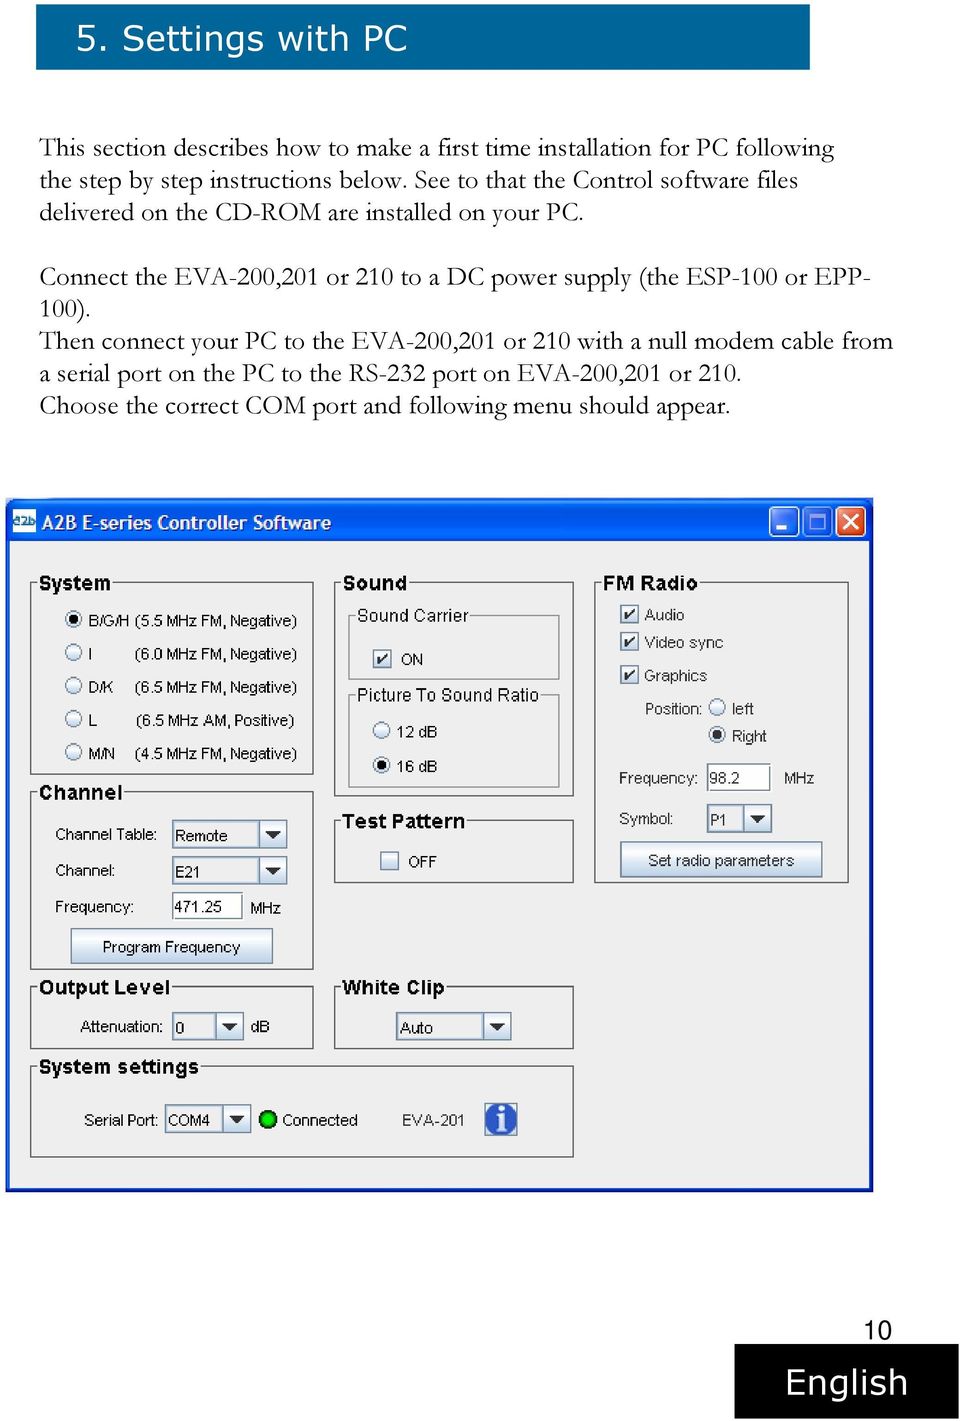 Connect the EVA-200,201 or 210 to a DC power supply (the ESP-100 or EPP- 100).